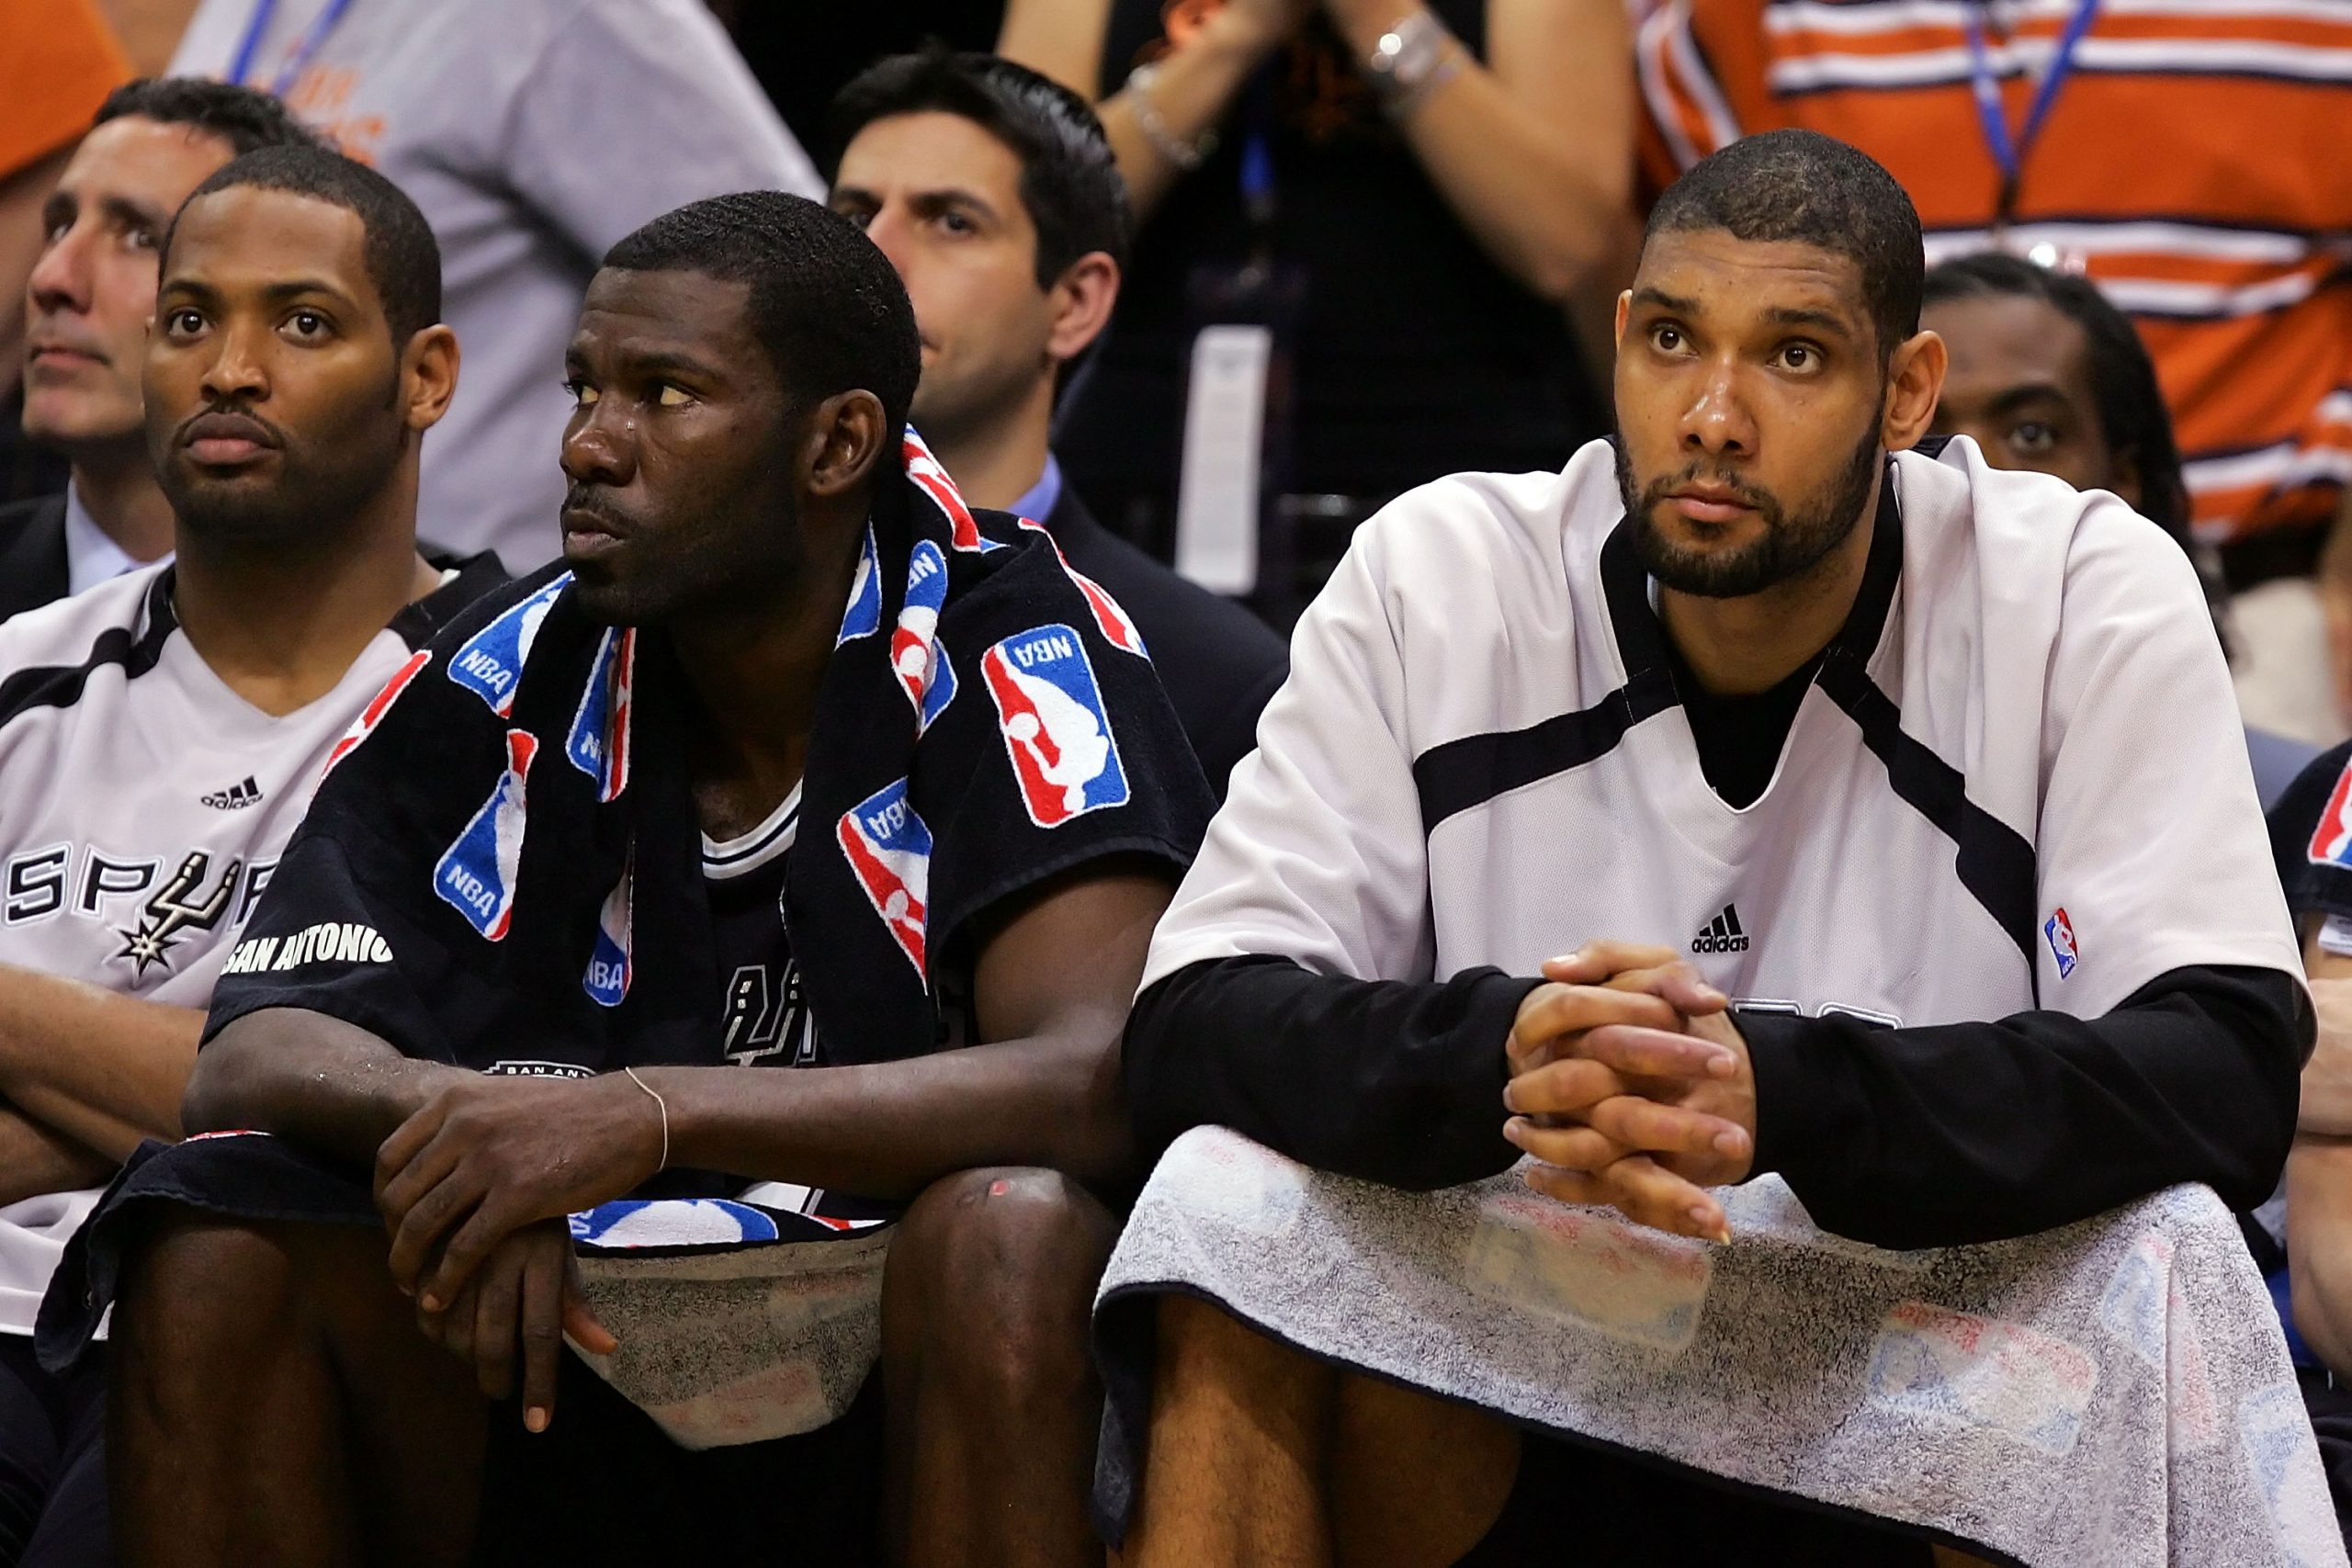 Tim Duncan: A Letter from a Fan, by SmarksOn Blog